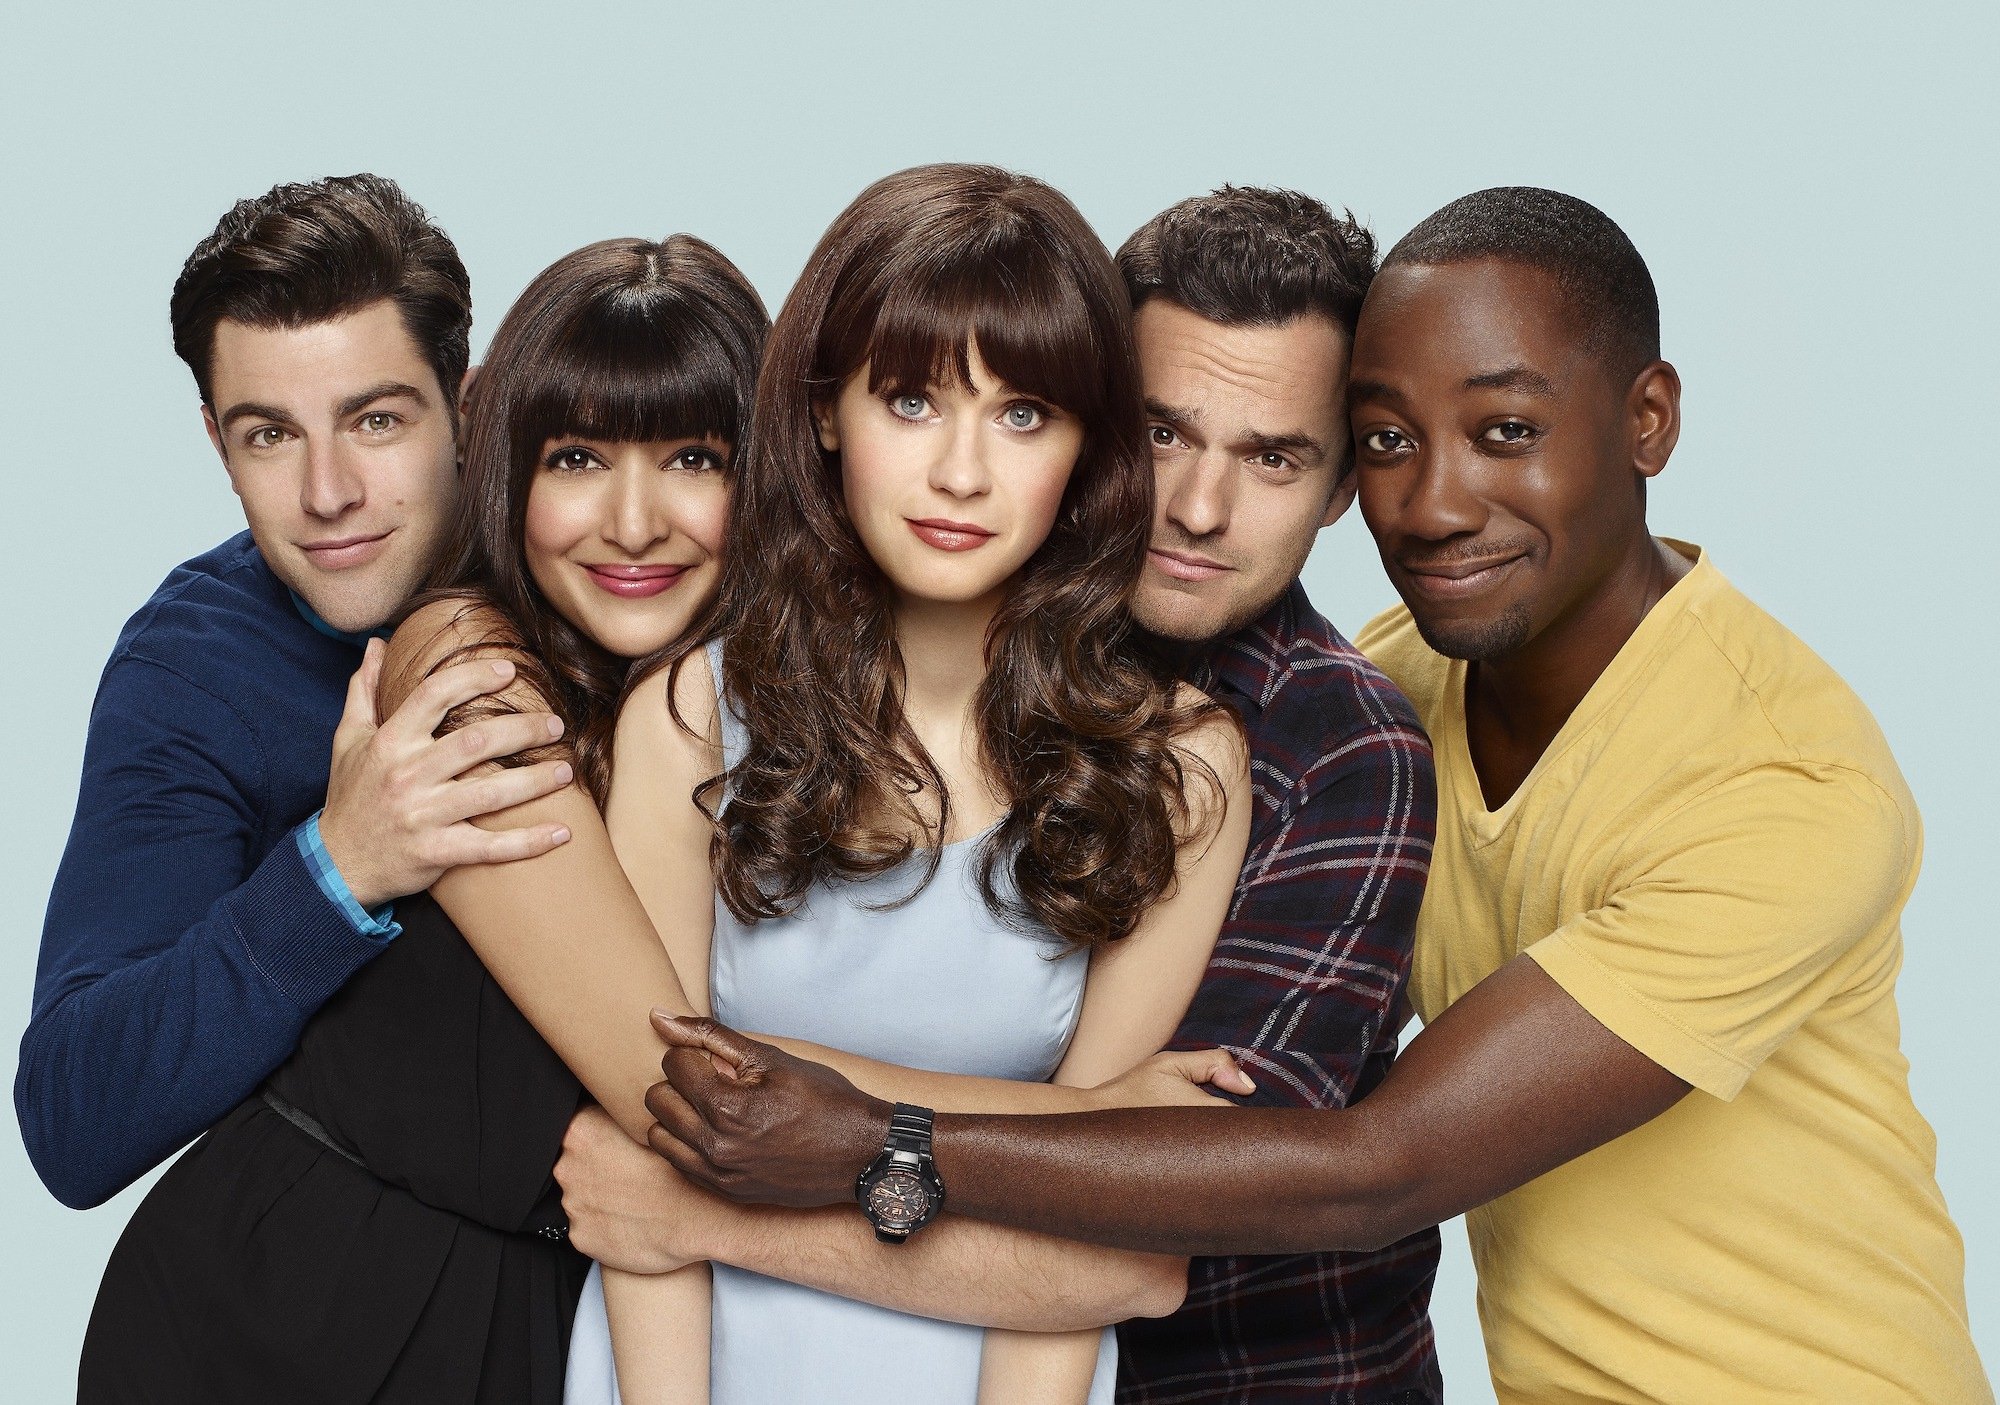 Max Greenfield, Hannah Simone, Zooey Deschanel, Jake Johnson and Lamorne Morris hugging each other on a promotional image for 'New Girl' Season 6.